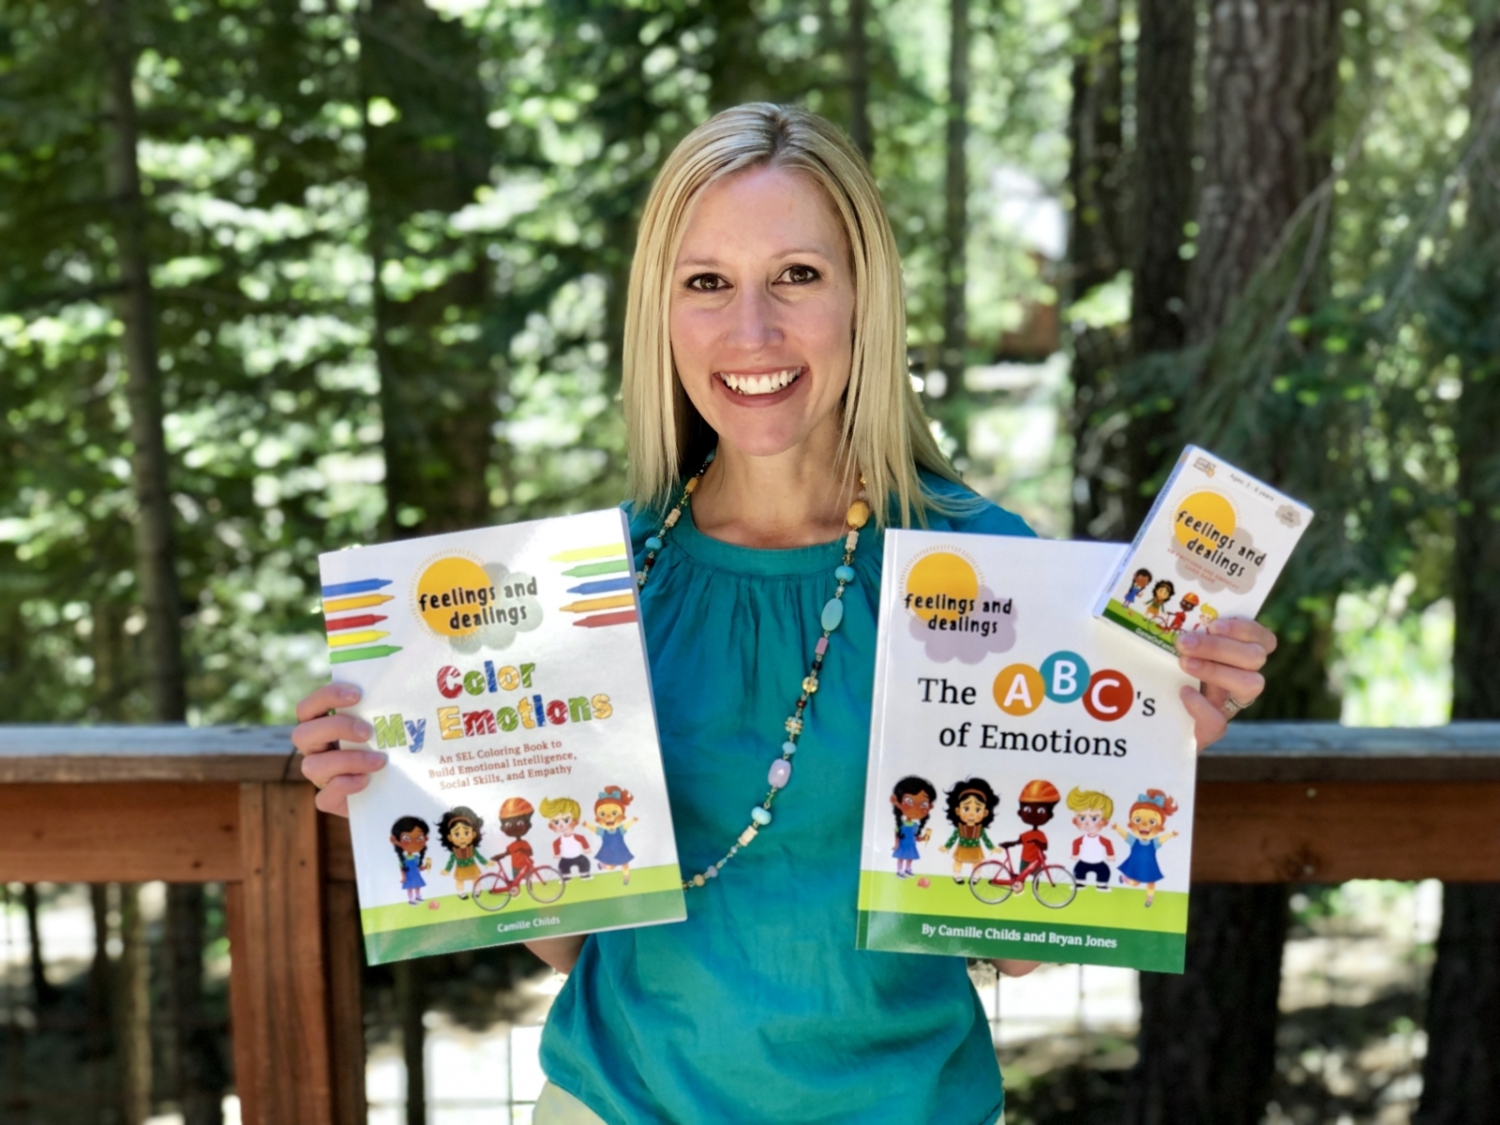 Author Camille Childs with Game On Family's Social Emotional Learning Books and Games